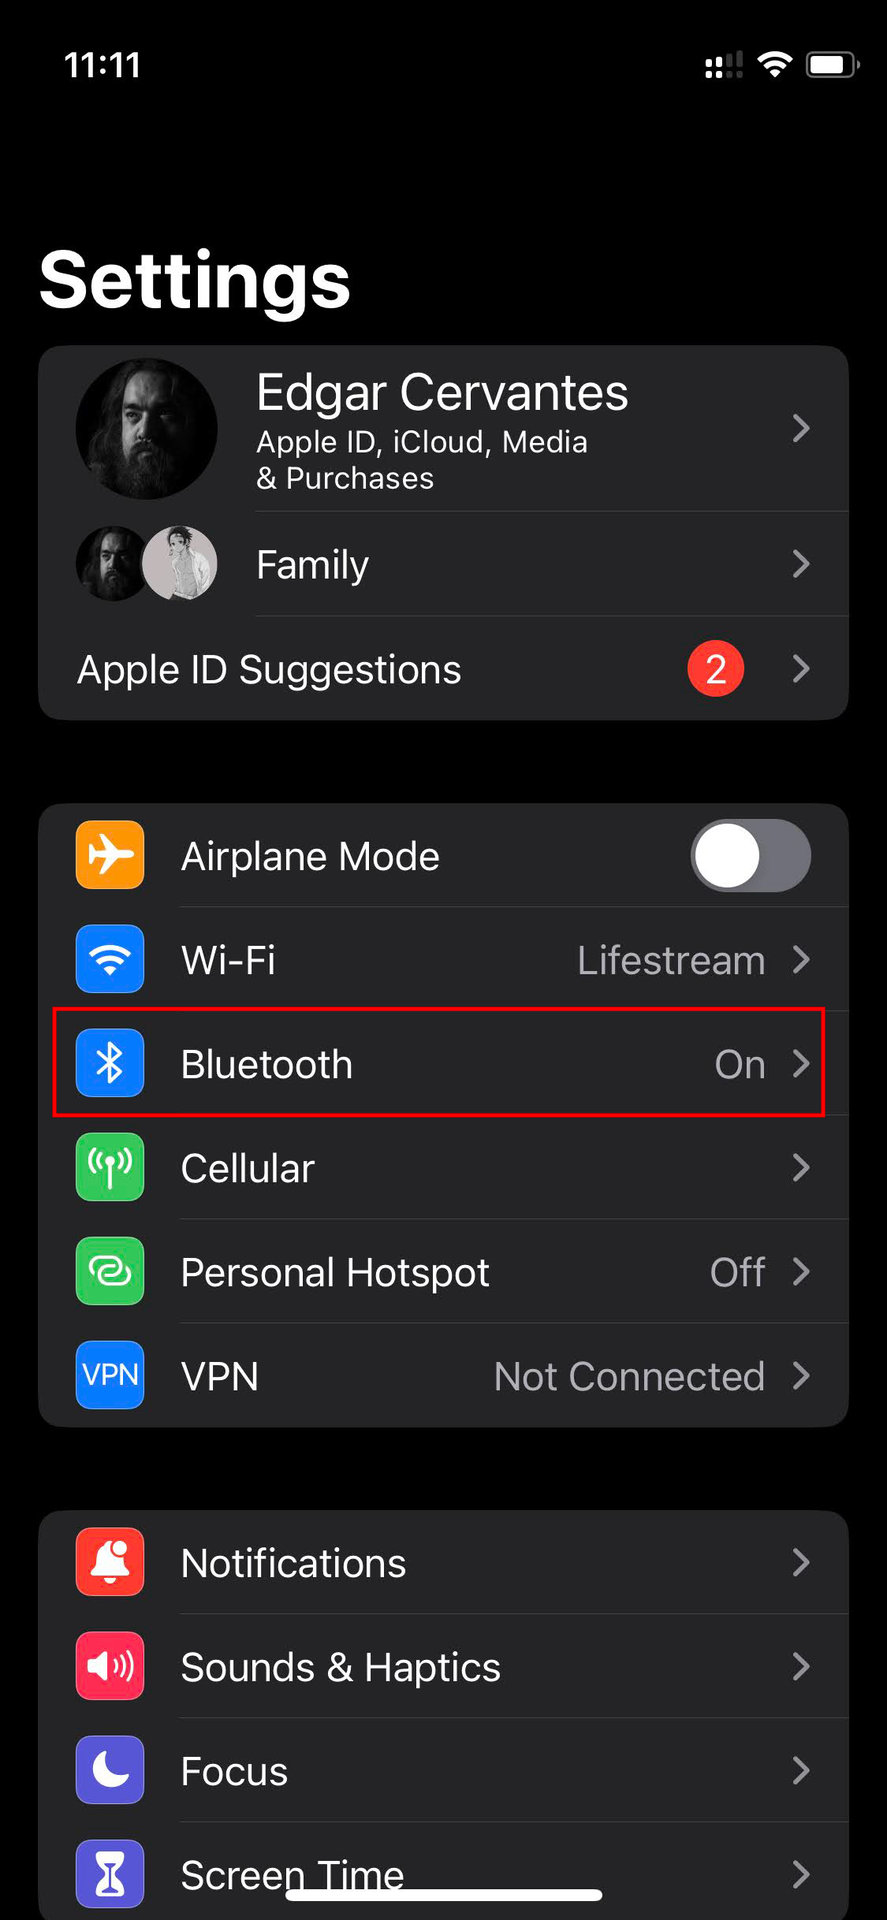 How to pair a Bluetooth device on iOS 1